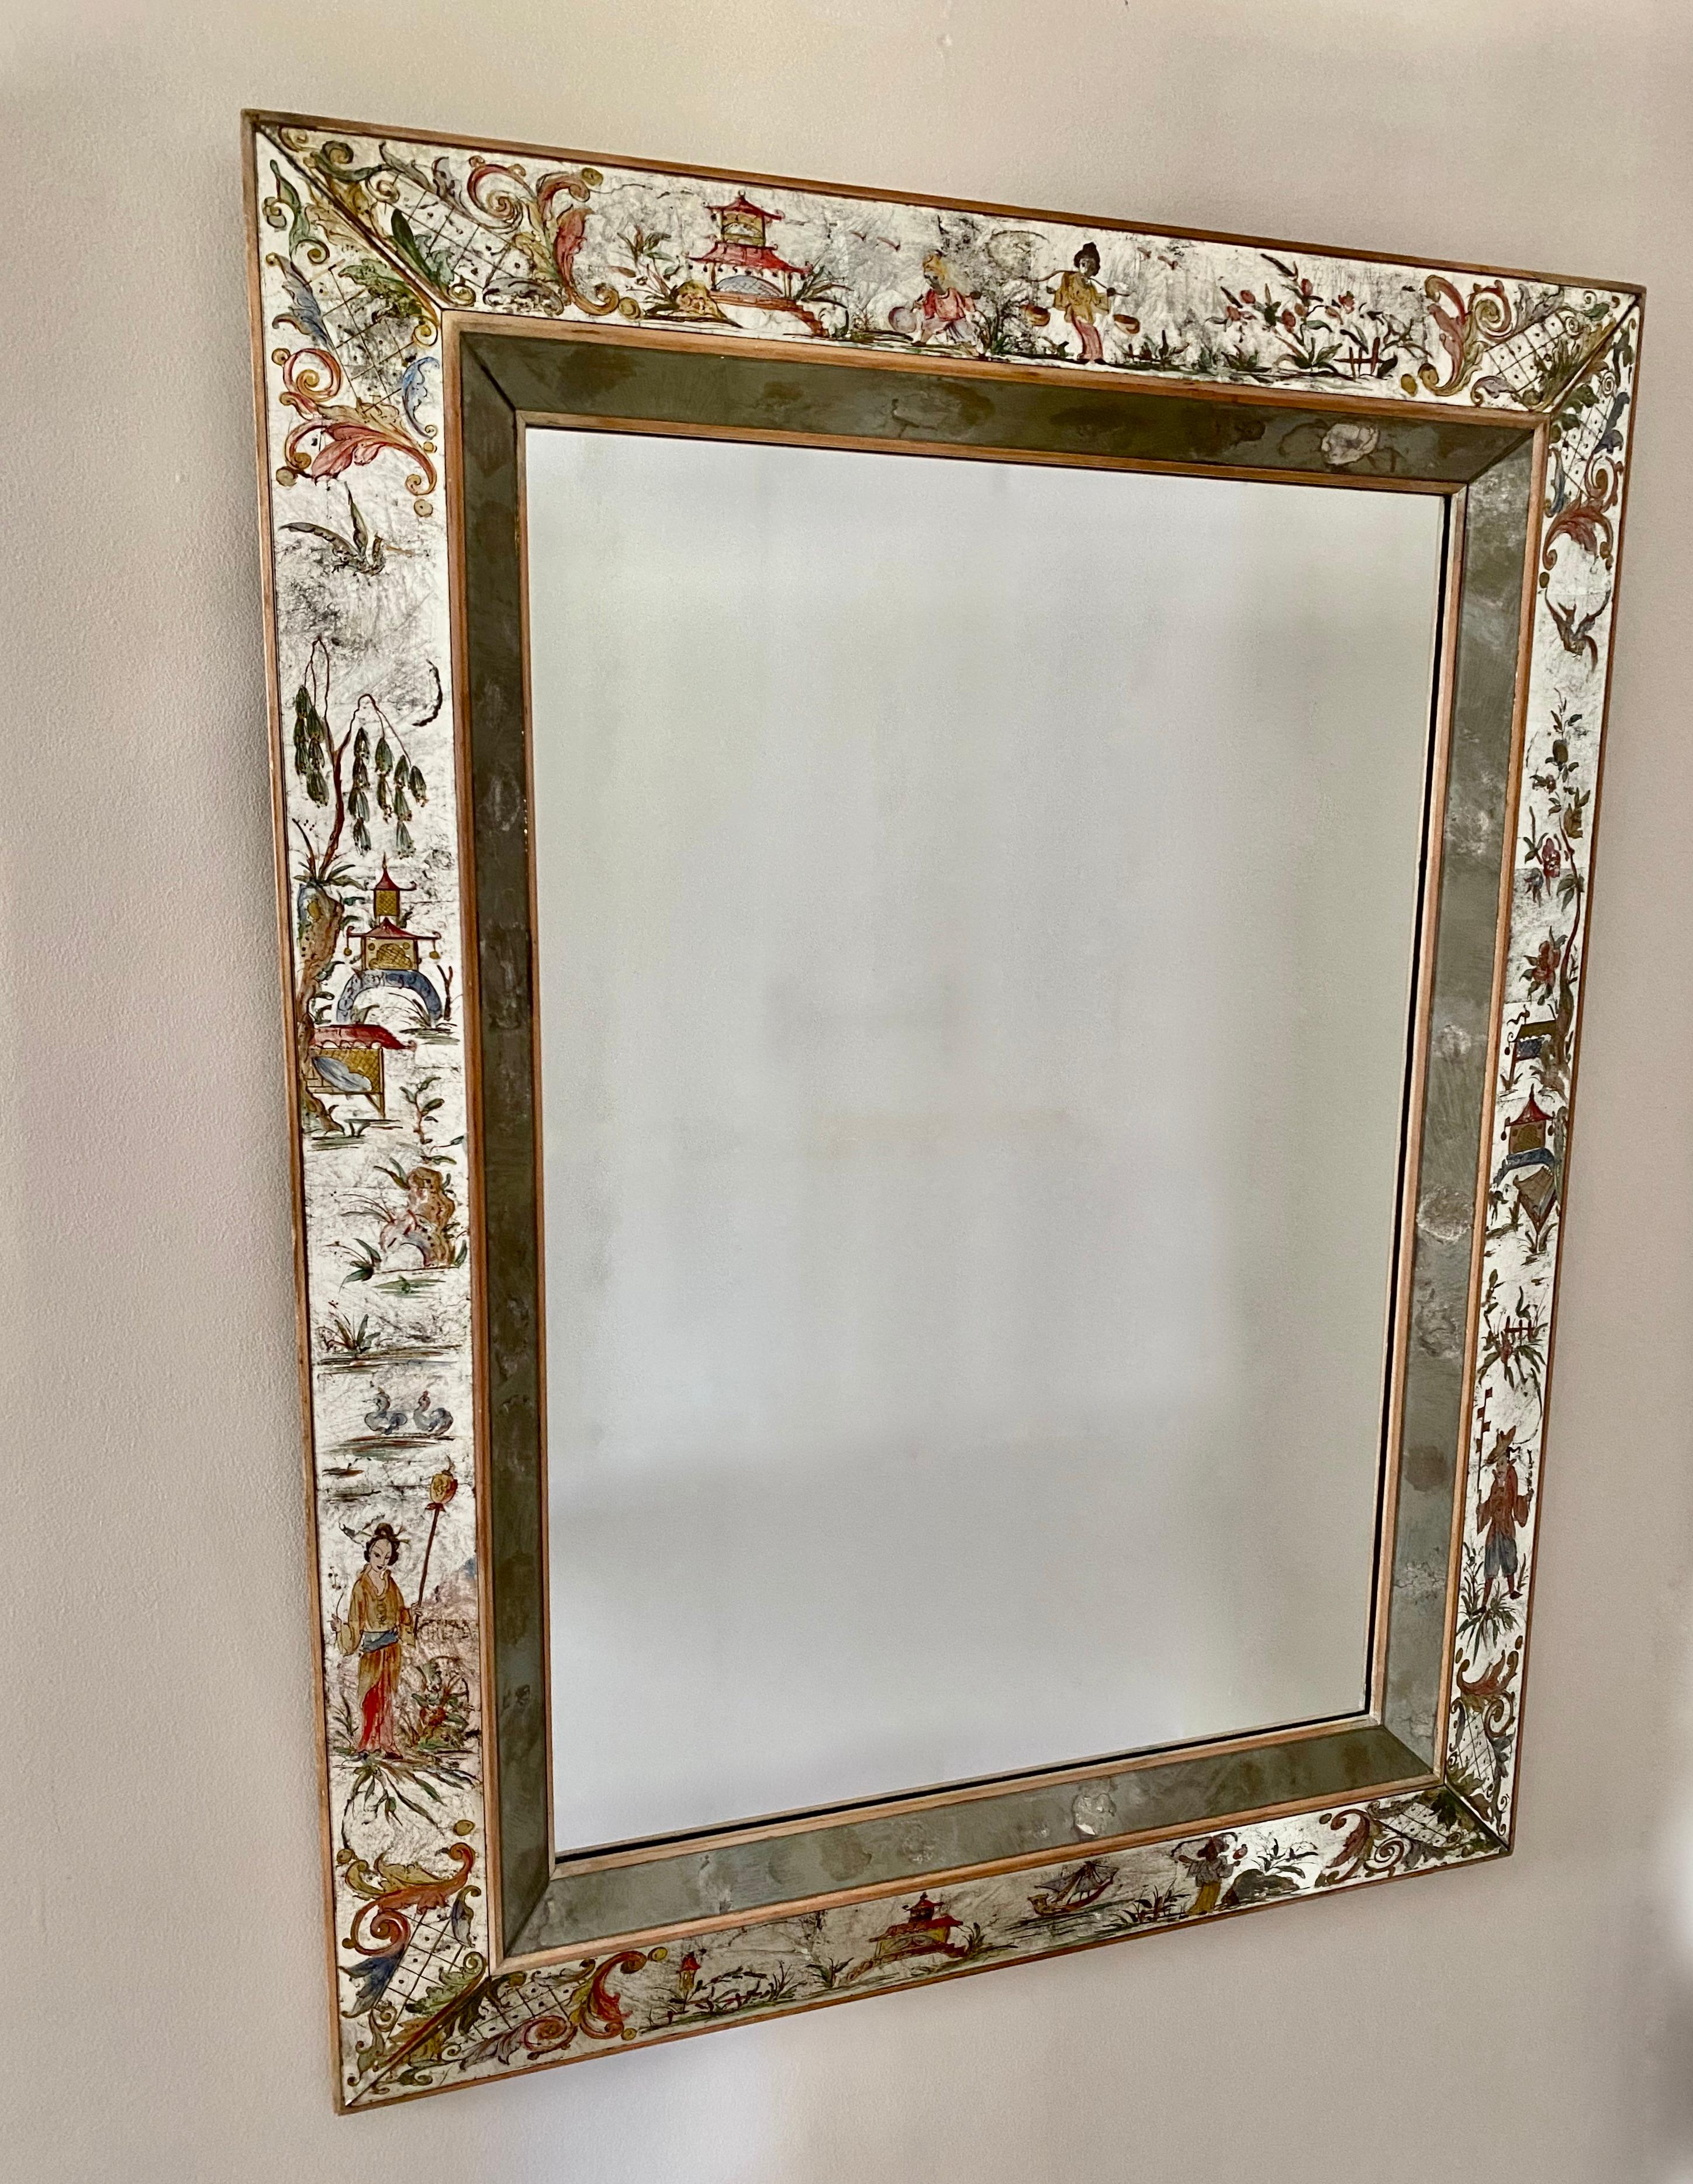 Large eglomisé wall mirror with charming and colorful hand reverse-painted Chinoiserie scenes and palladium silvered backing. Interior mirrored glass has fumed silvering. Exterior wood frame is in a neutral pickled finish. Painted decoration is